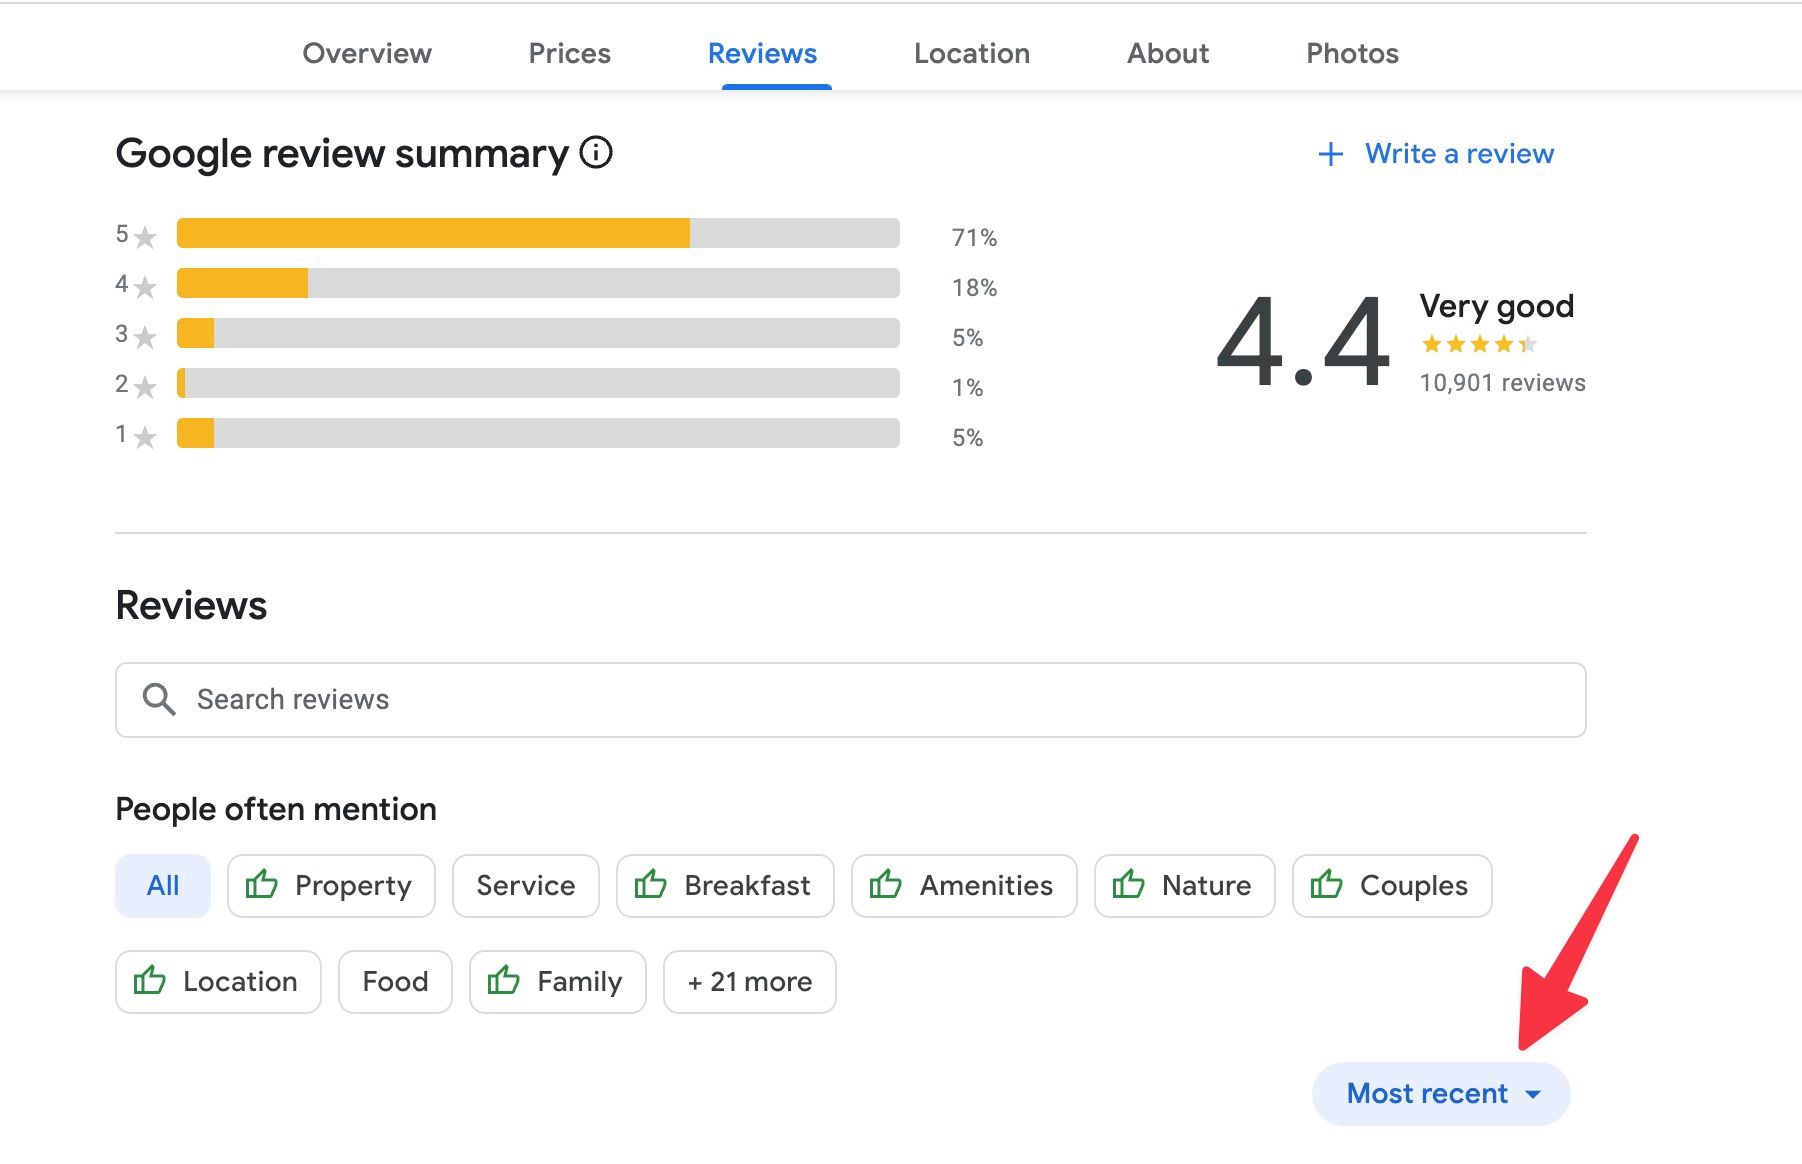 A screenshot of the Google review summary screen with a rating of 4.4, indicating very good reviews. A red arrow is pointing towards the ‘most recent’ button on the bottom right corner of the screen.